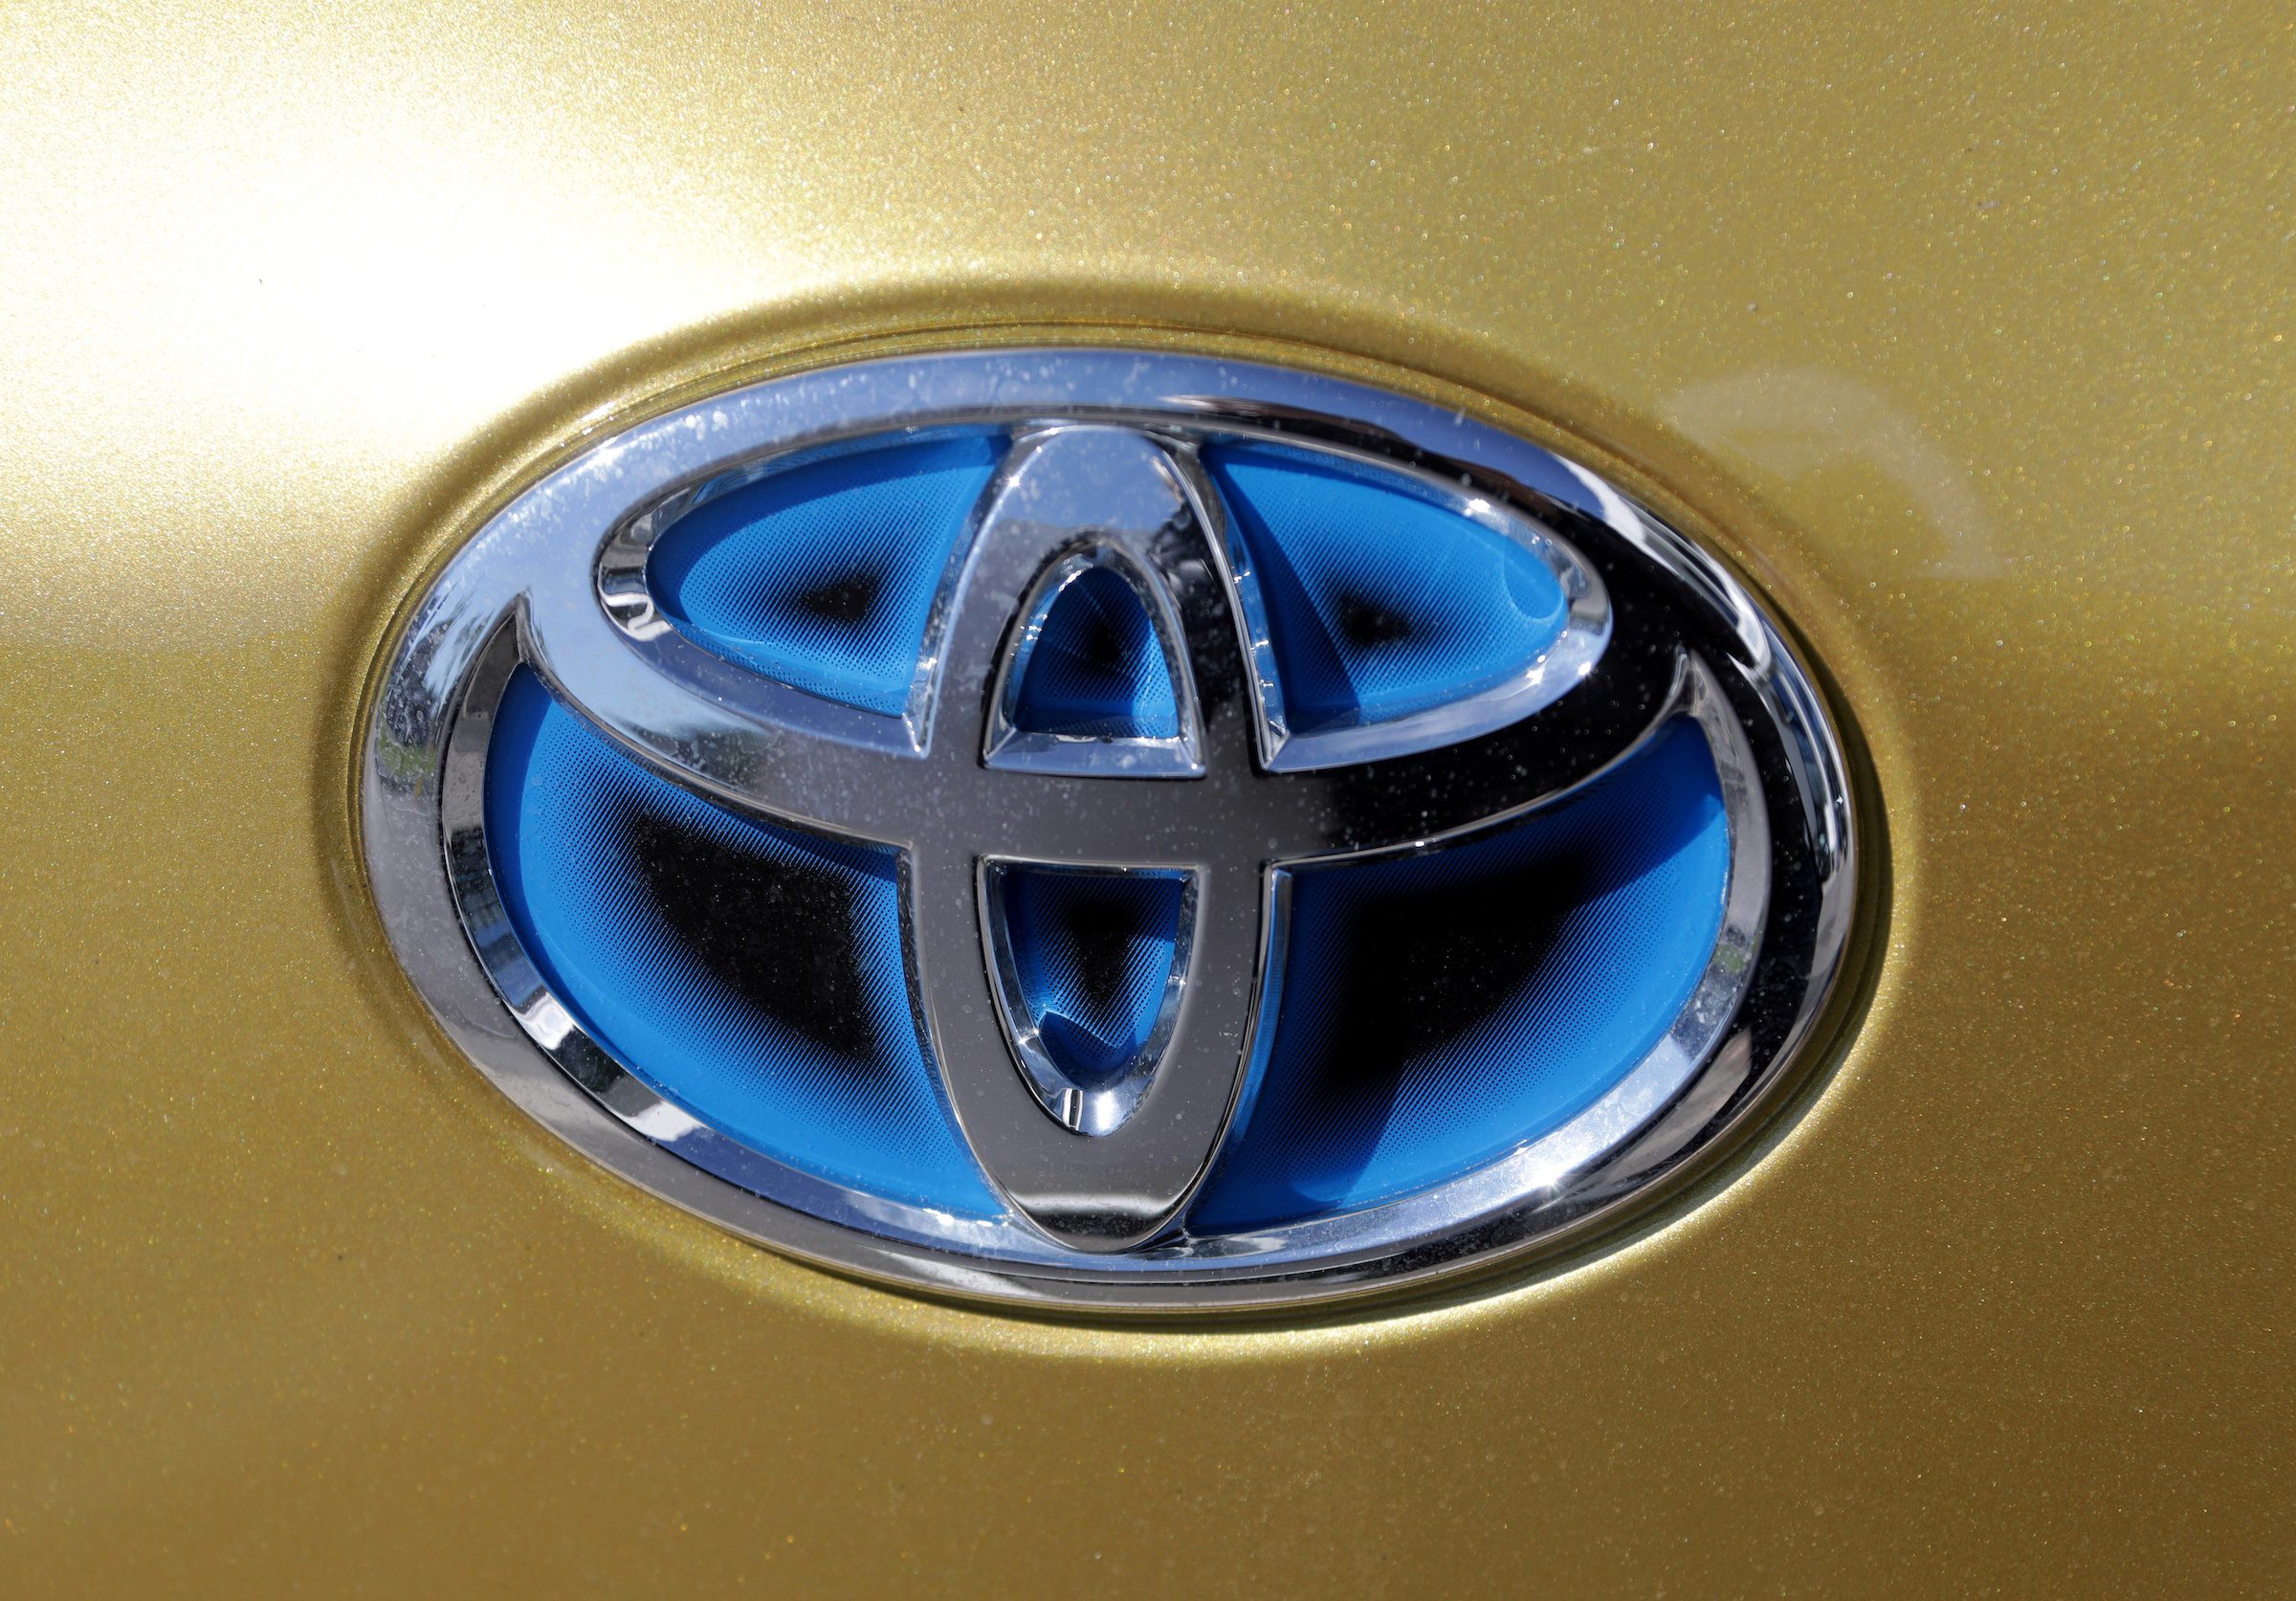 Toyota launches Ghana’s second auto assembly plant